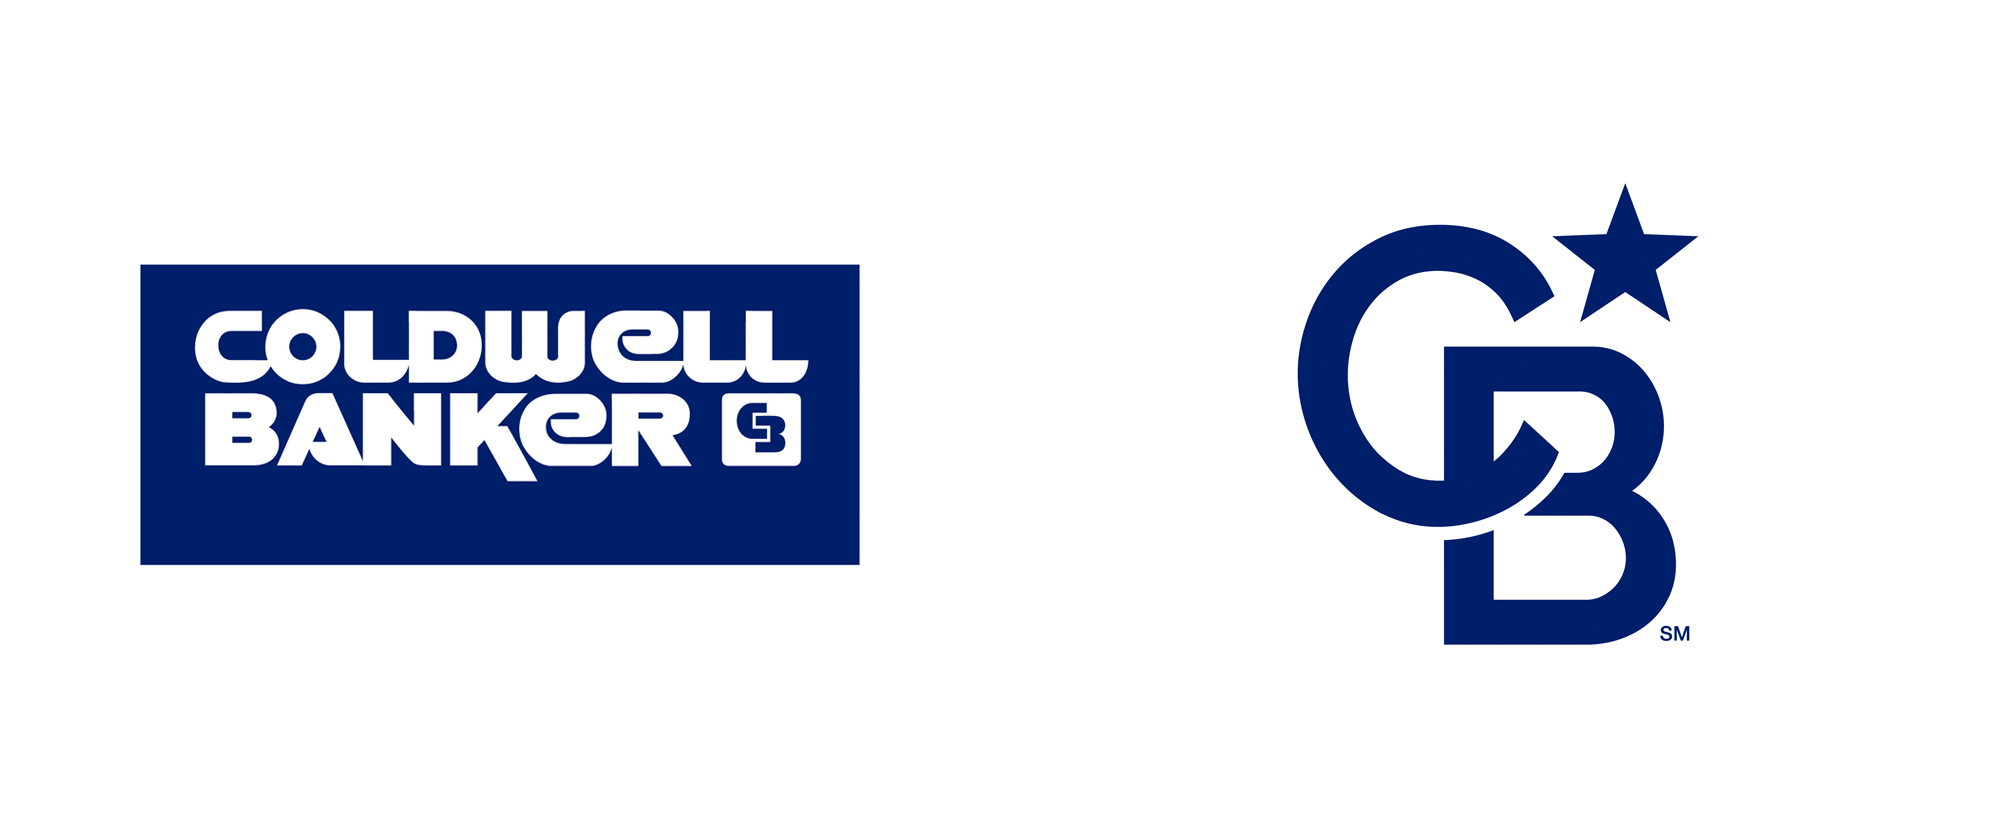 New Logo for Coldwell Banker by Siltanen & Partners